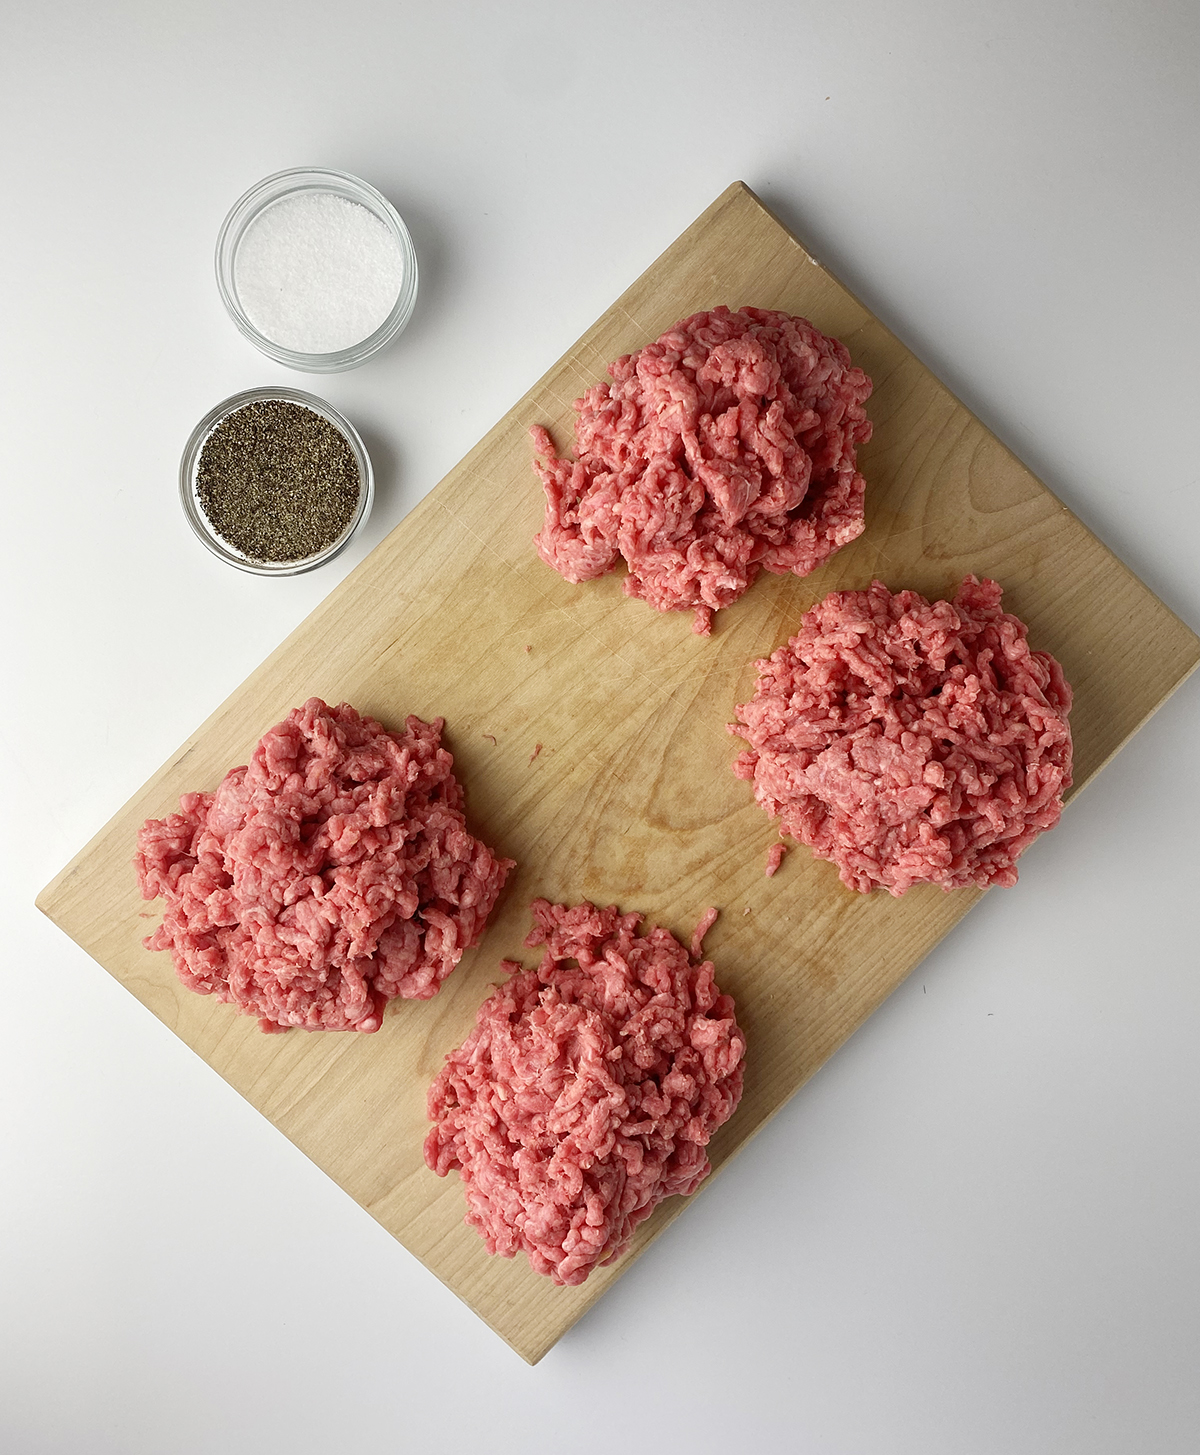 piles of ground beef for burgers